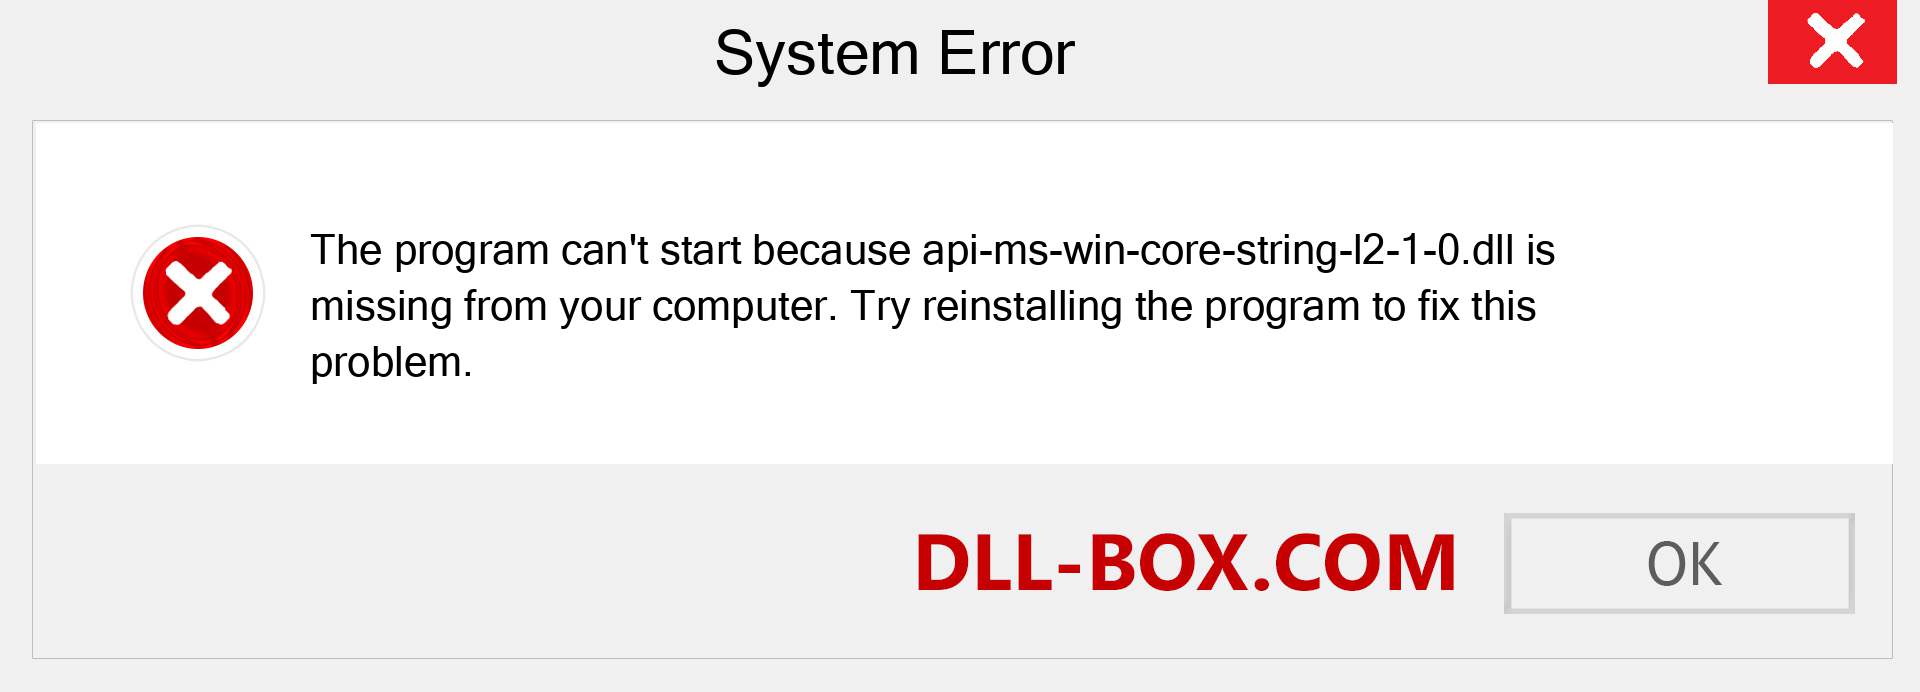  api-ms-win-core-string-l2-1-0.dll file is missing?. Download for Windows 7, 8, 10 - Fix  api-ms-win-core-string-l2-1-0 dll Missing Error on Windows, photos, images